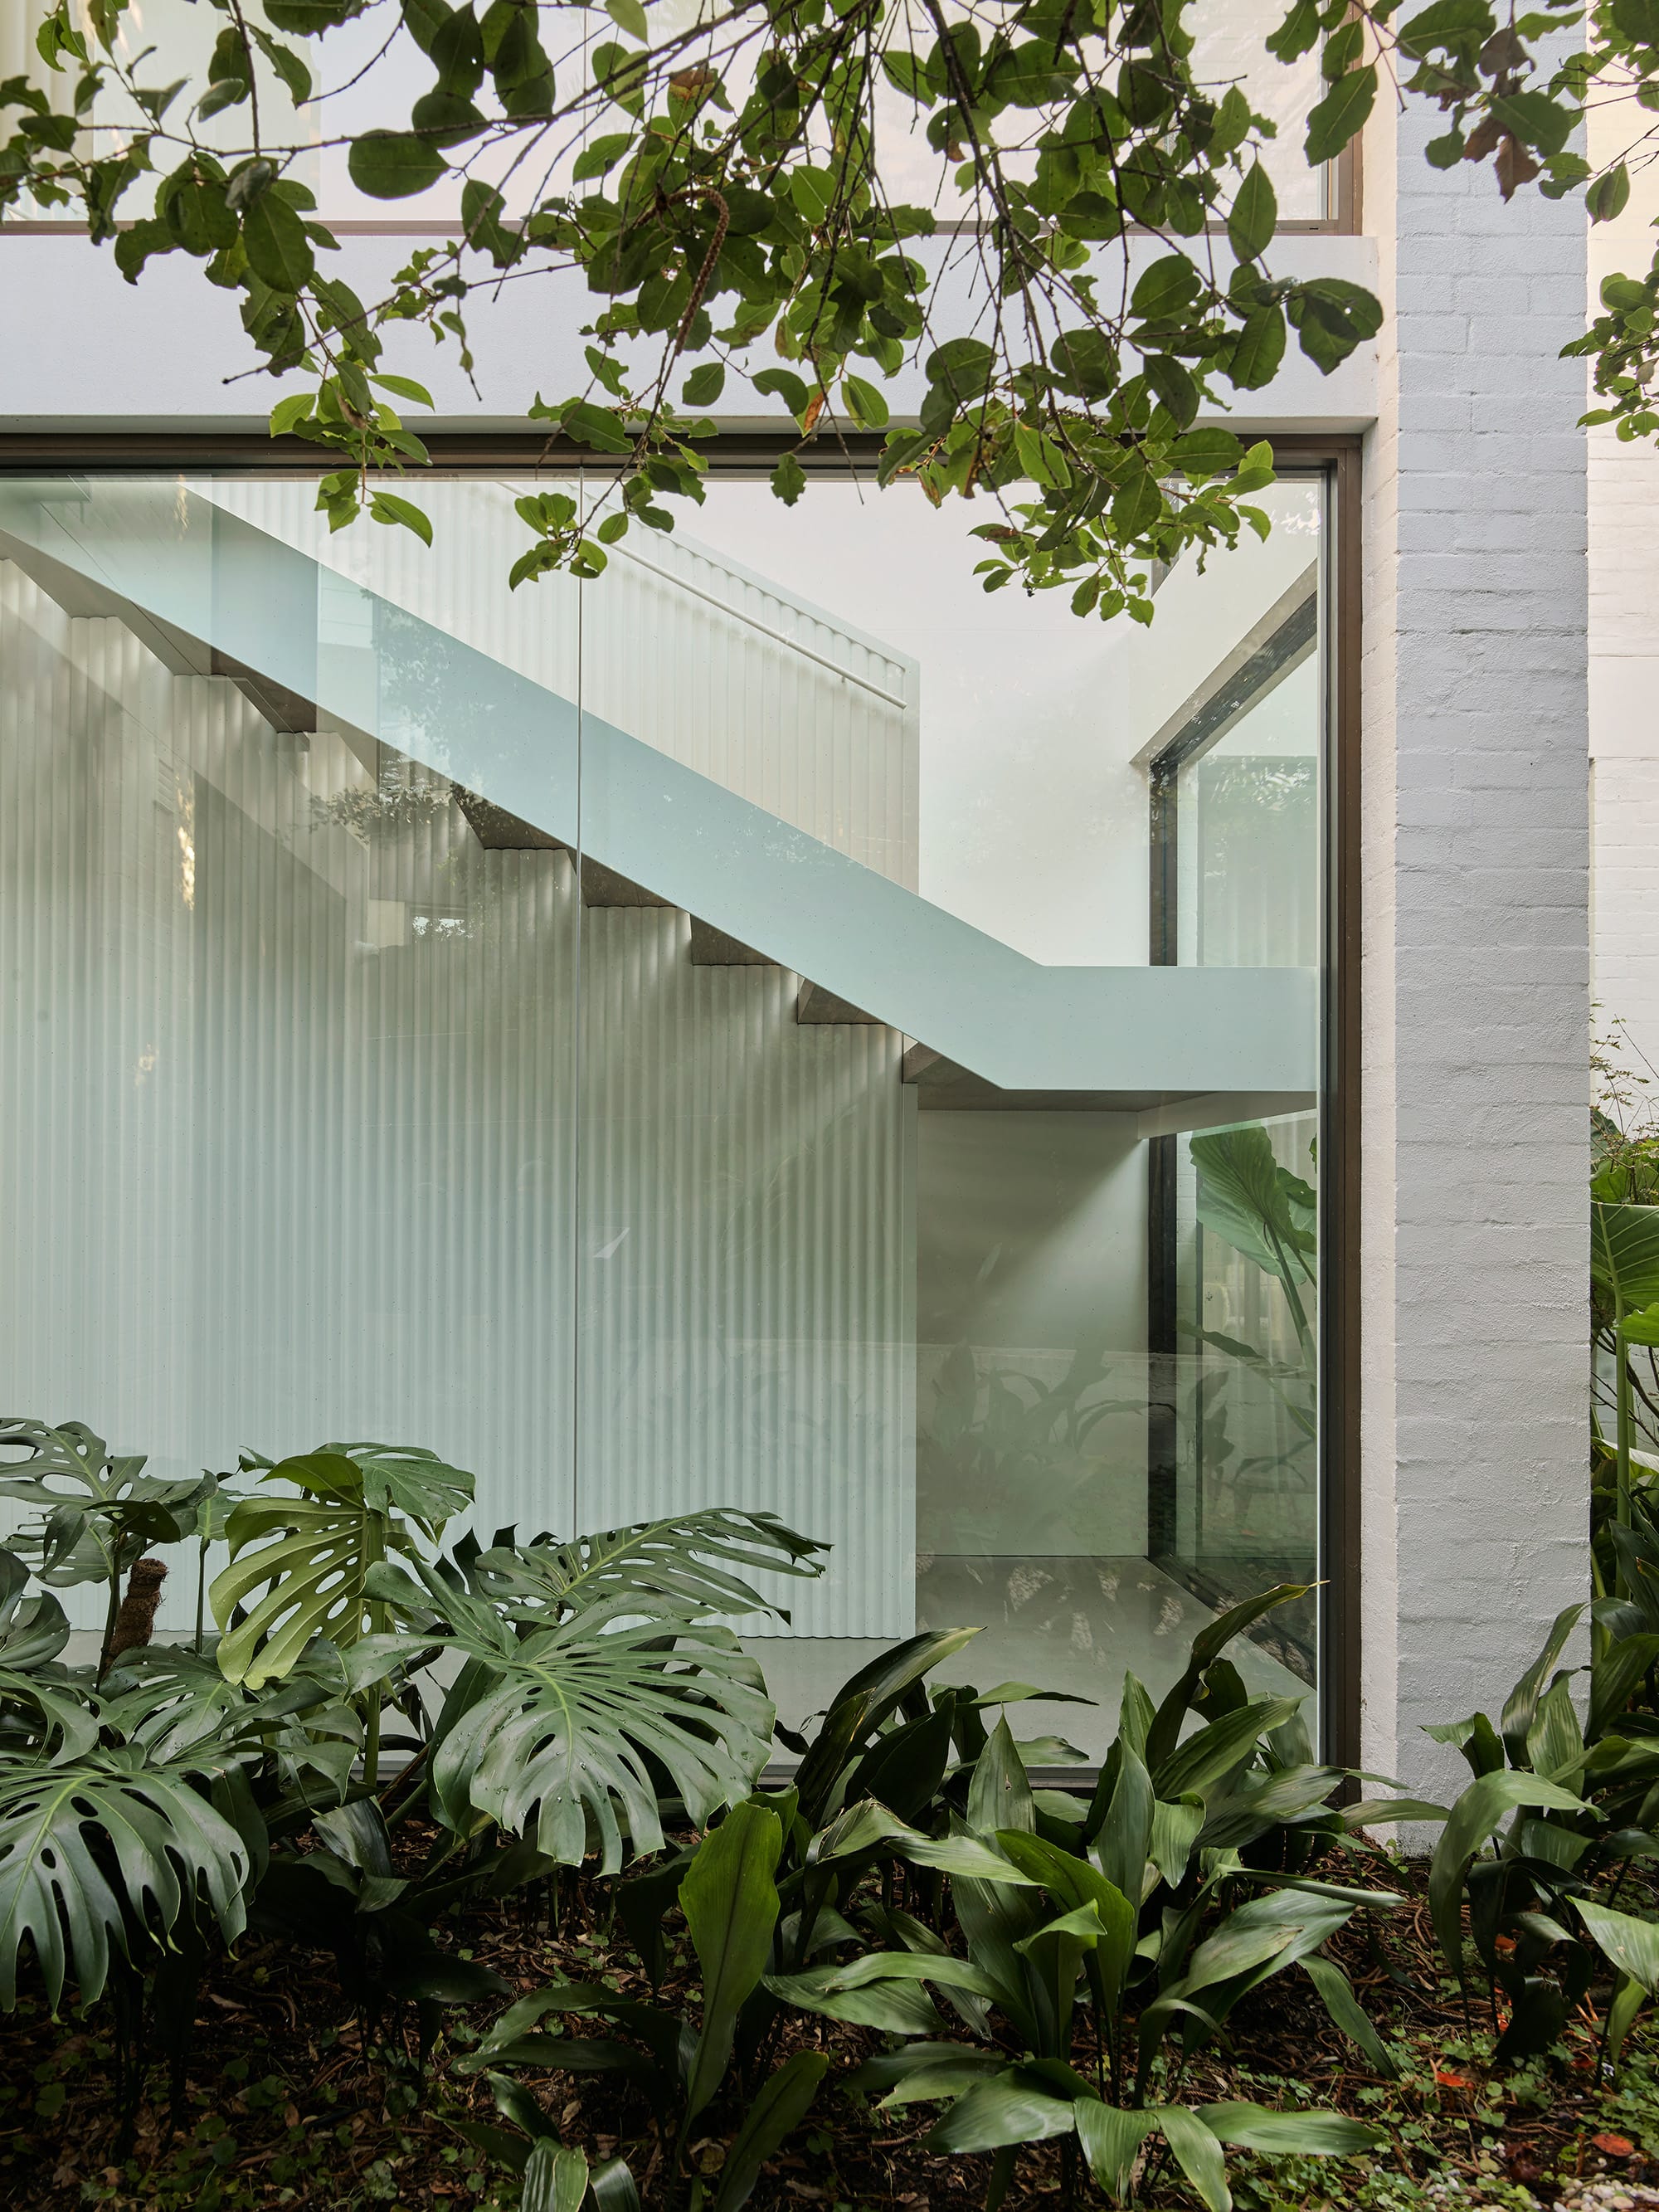 Warren House by CM Studio. Photography by Nic Gossage. Garden bed with double storey window in background. Staircase visible through window.